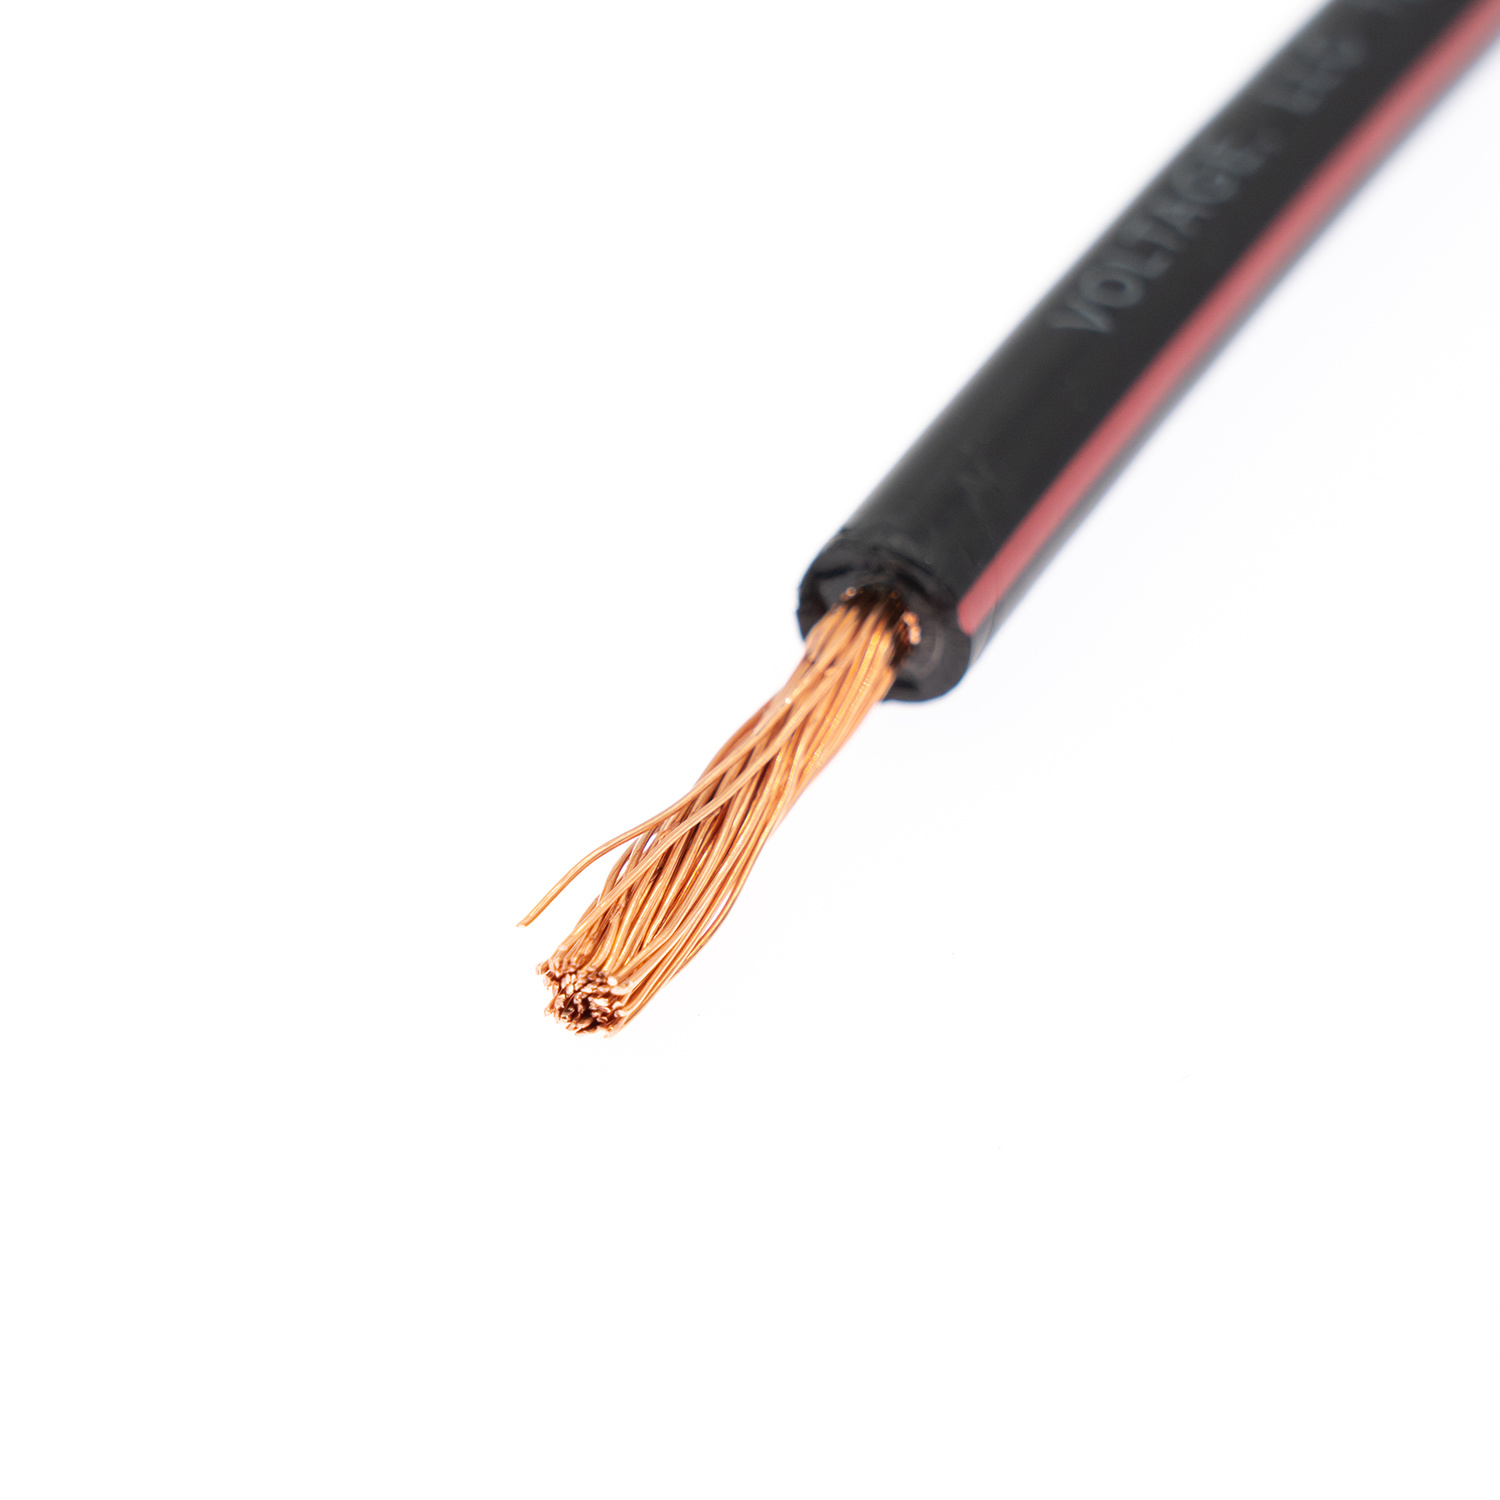 Cable Copper, Aluminum Alloy Conductor cUL Listed PV Wire Rpvu90 10AWG